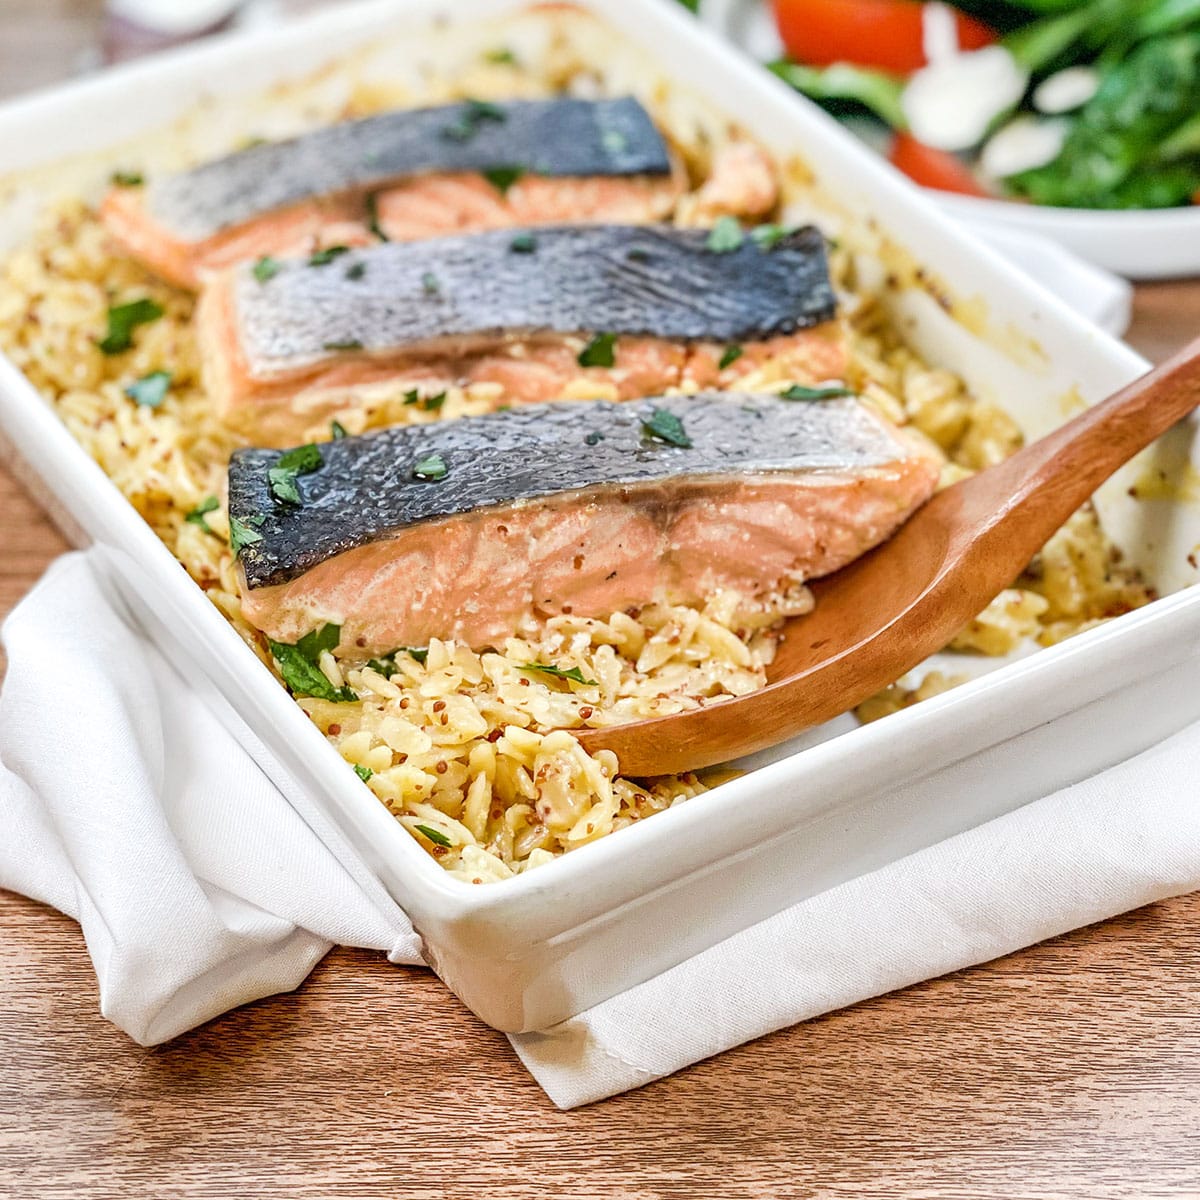 https://cookthestory.com/wp-content/uploads/2022/01/salmonorzo-square-01.jpg